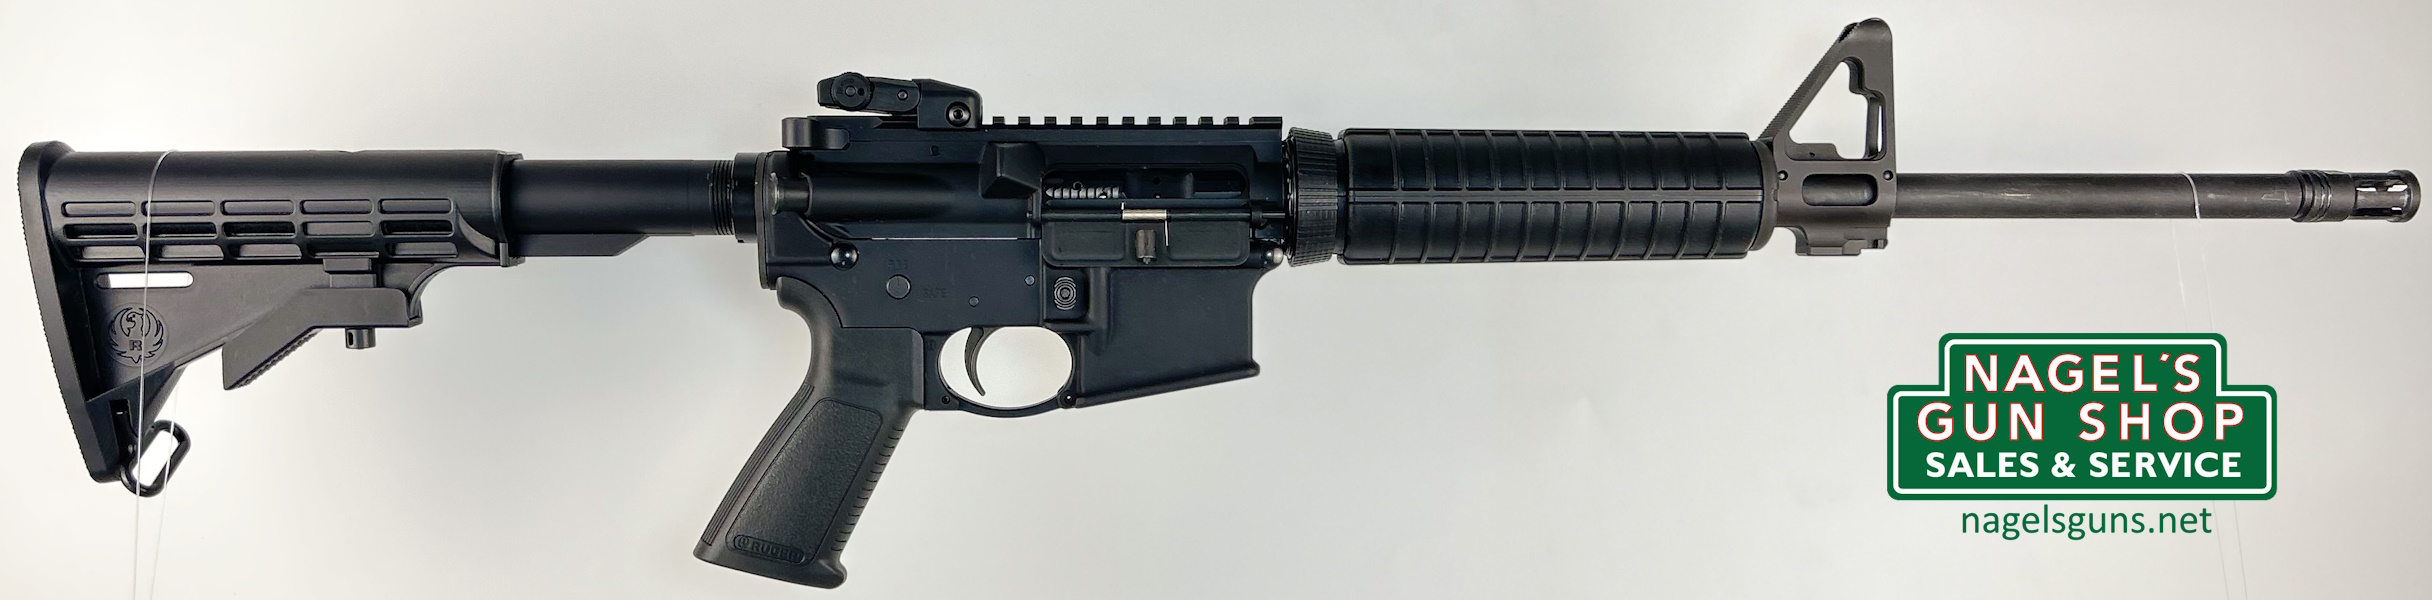 Ruger AR-556 5.56x45mm Rifle